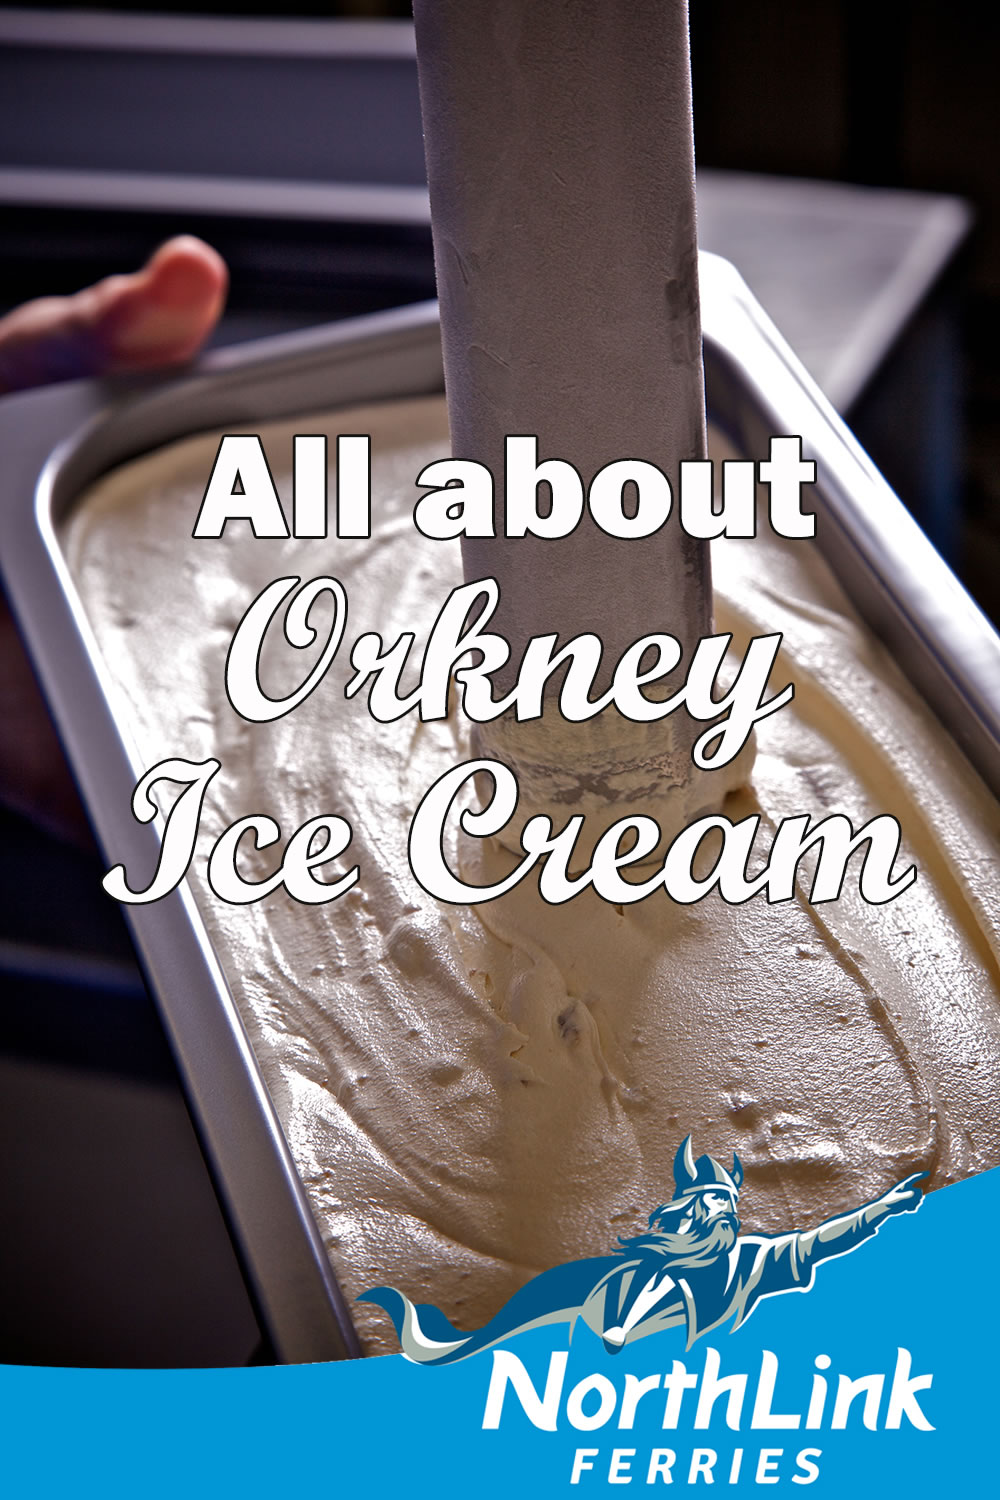 All about Orkney Ice Cream